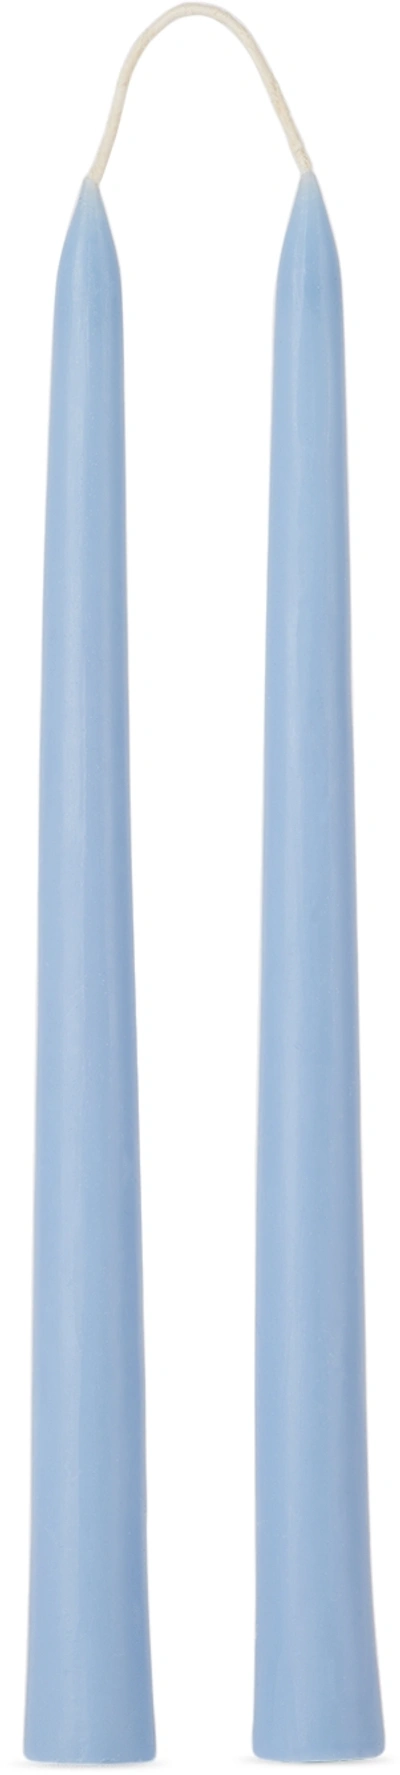 Marloe Marloe Green Tapered Candle Stick Set In Olive